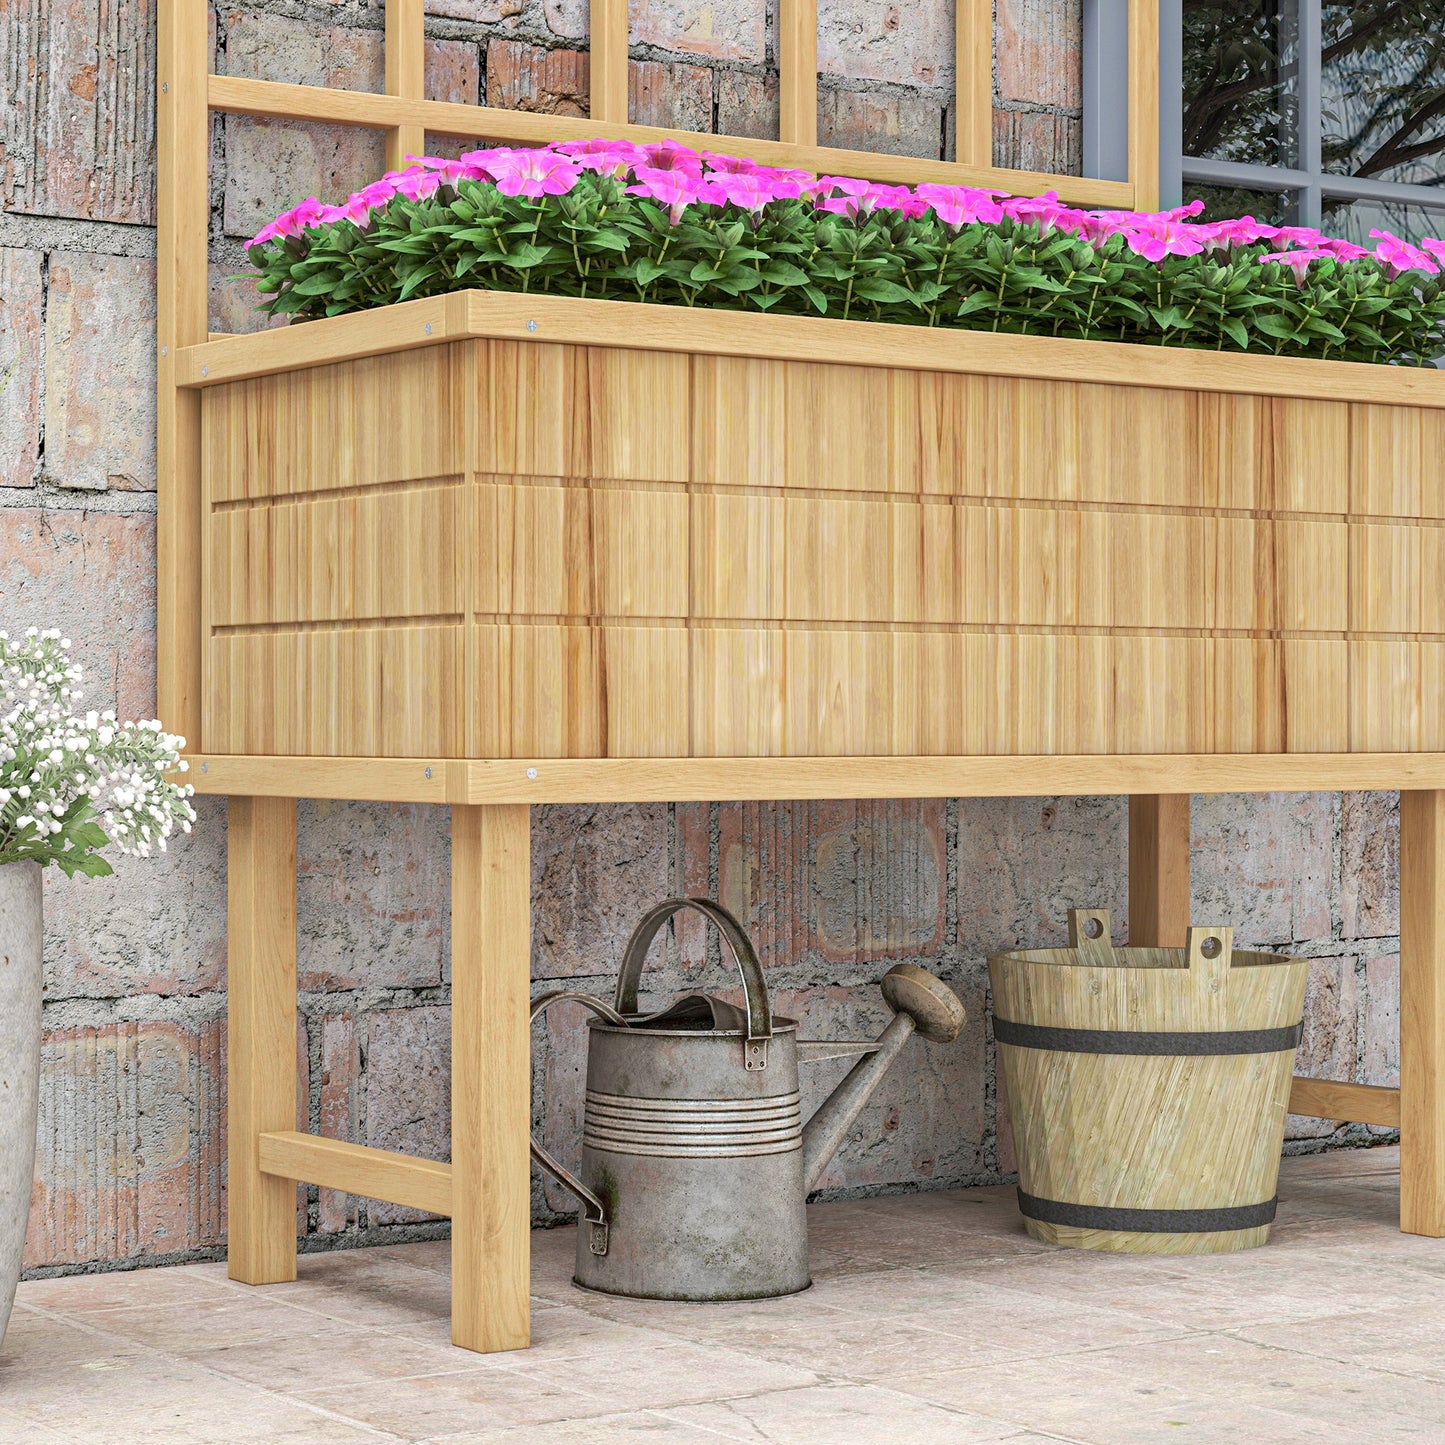 Outsunny Wooden Raised Planter with Trellis for Vine Climbing Plants, Elevated Garden Bed with Drainage Holes and Bed Liner for Vegetables, Flowers, Herbs, 105 x 45 x 140cm, Natural